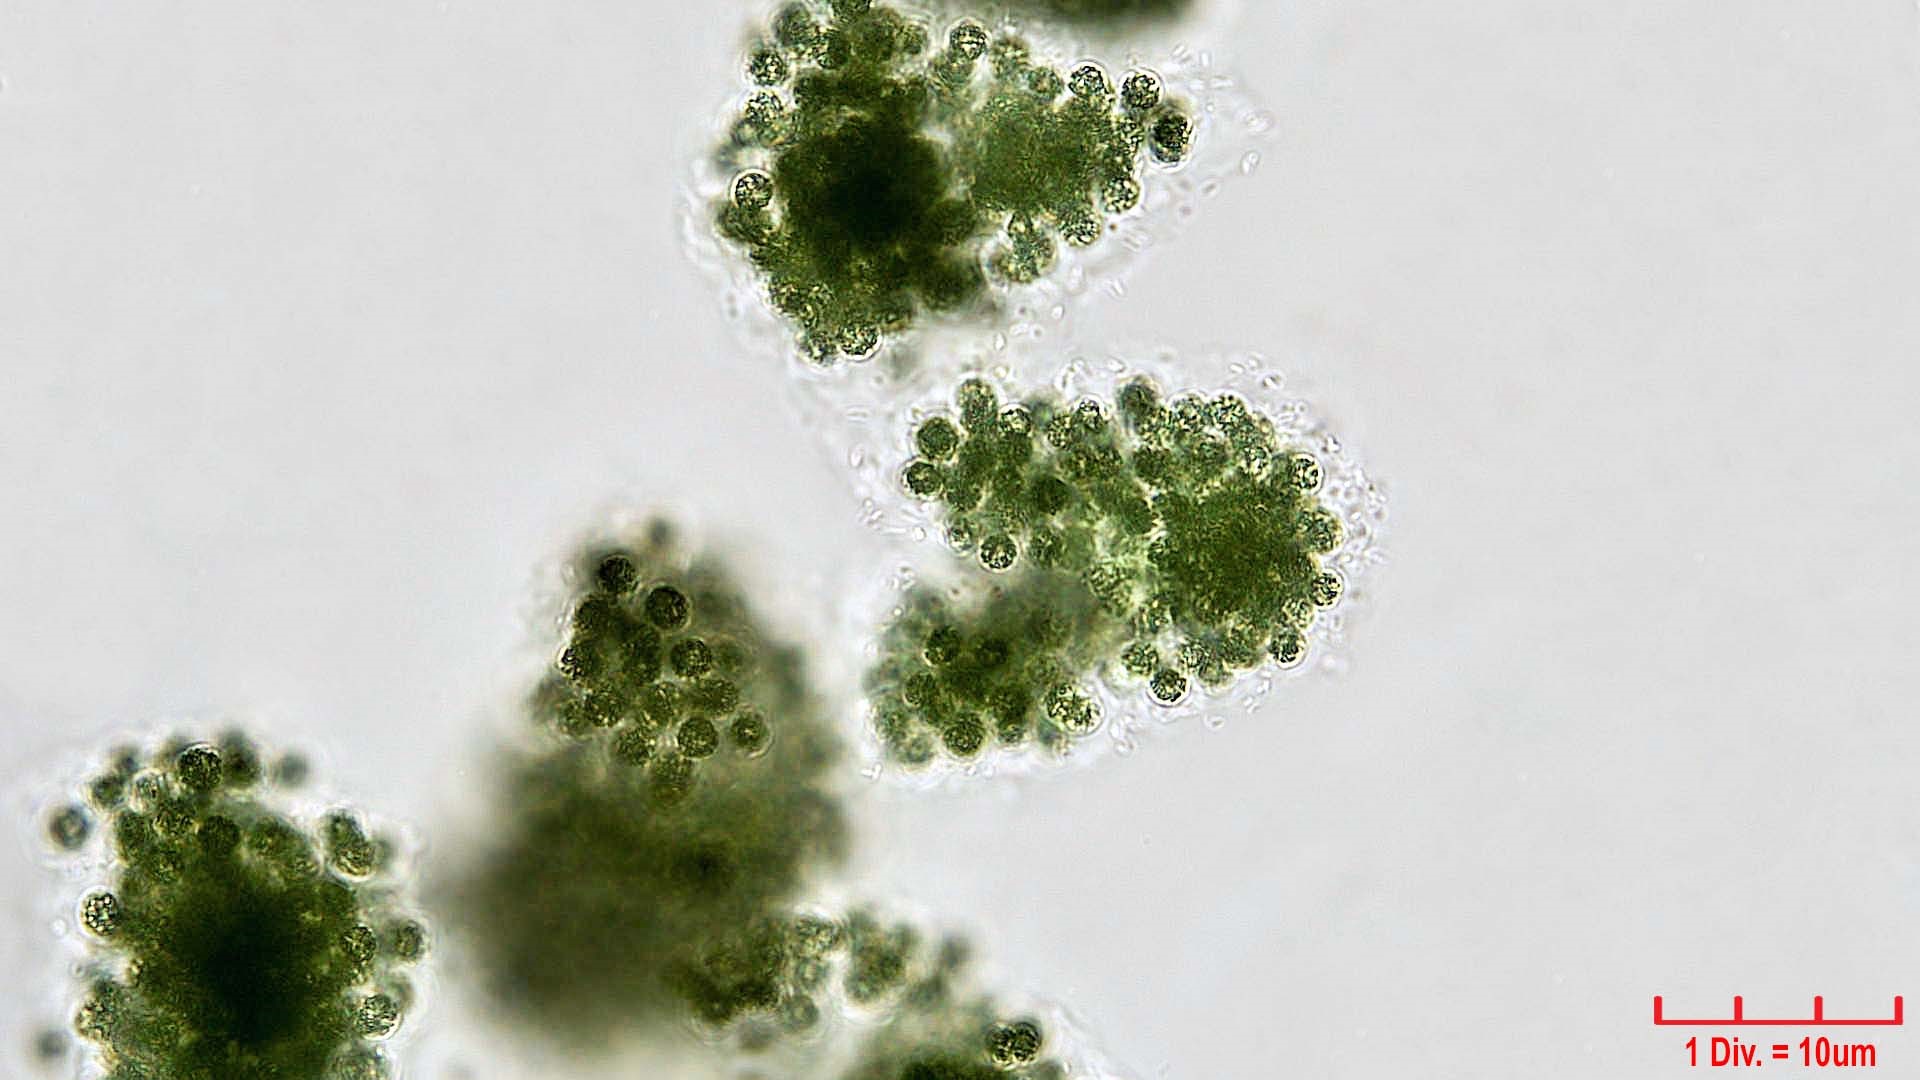 ././Cyanobacteria/Chroococcales/Microcystaceae/Microcystis/viridis/microcystis-viridis-66.jpg